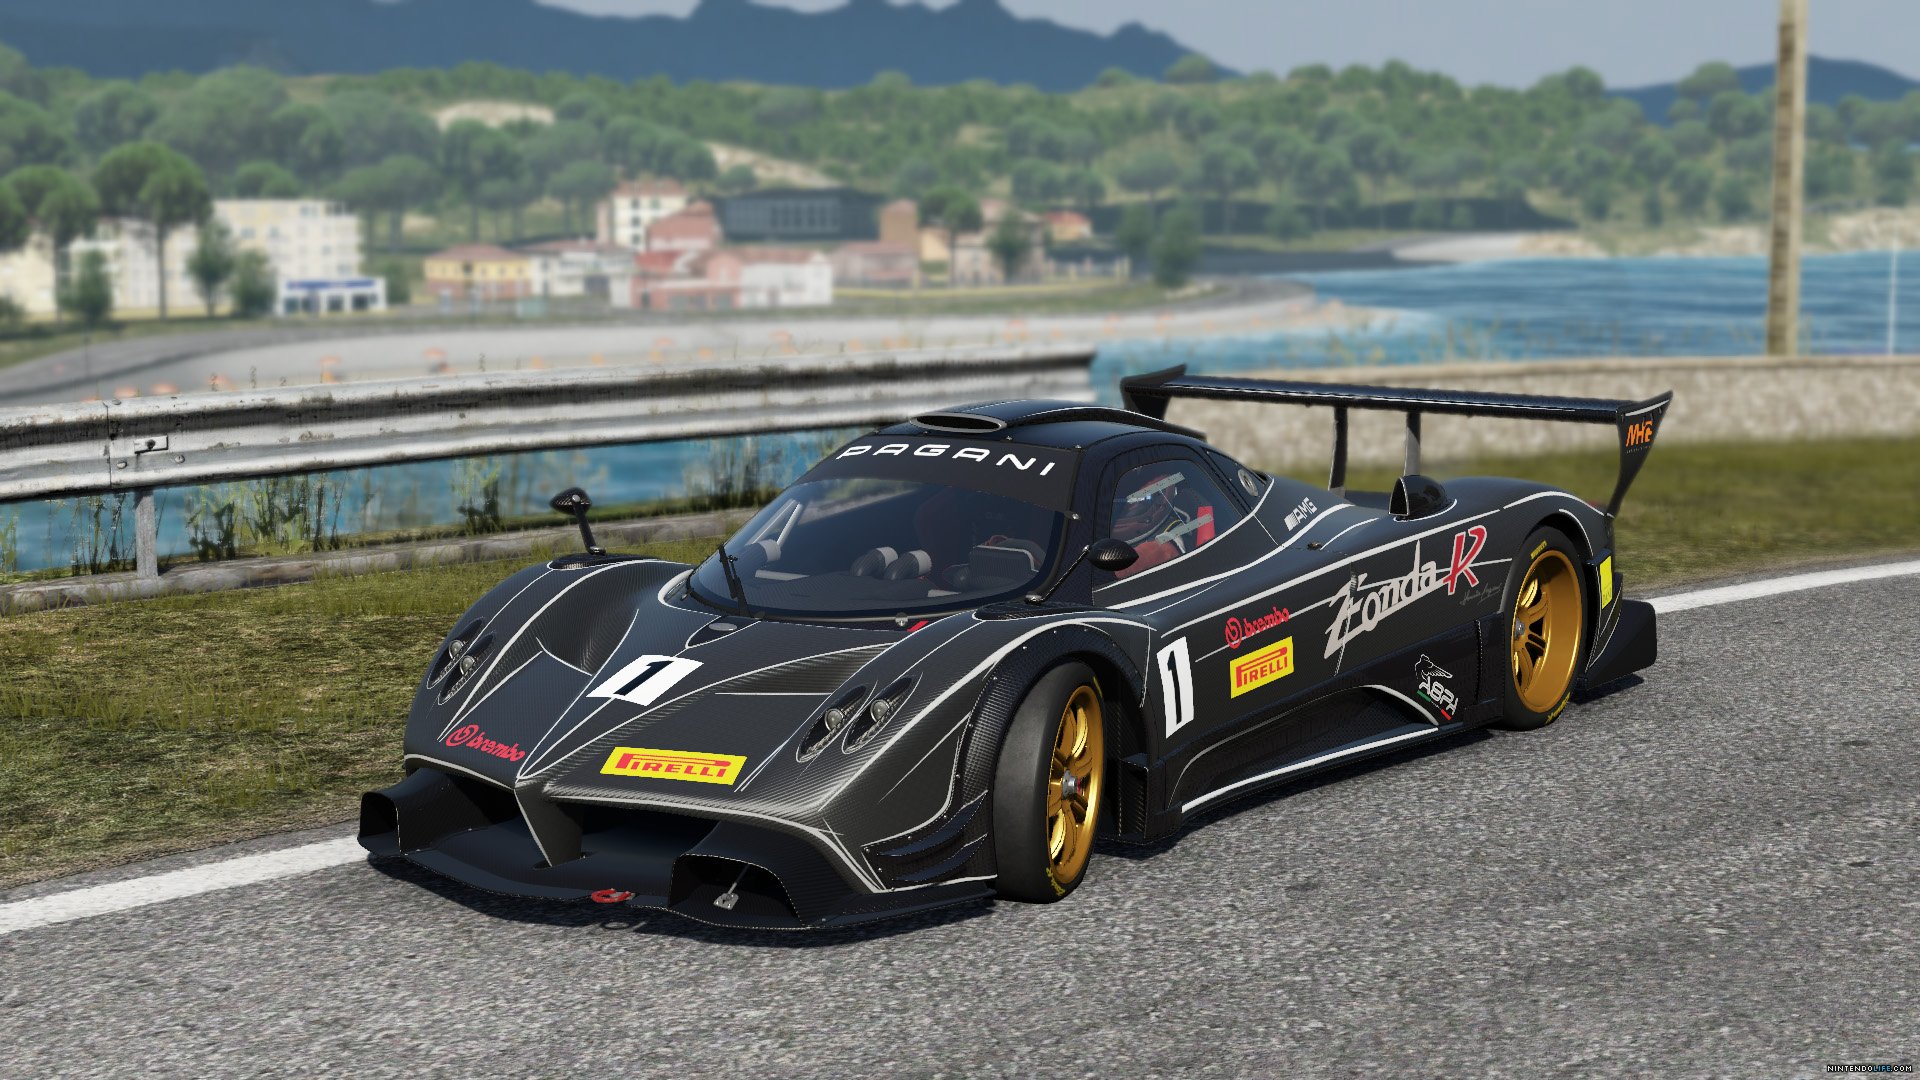 Project Cars On Wii U Struggles At 23 Fps In 7p Future Uncertain